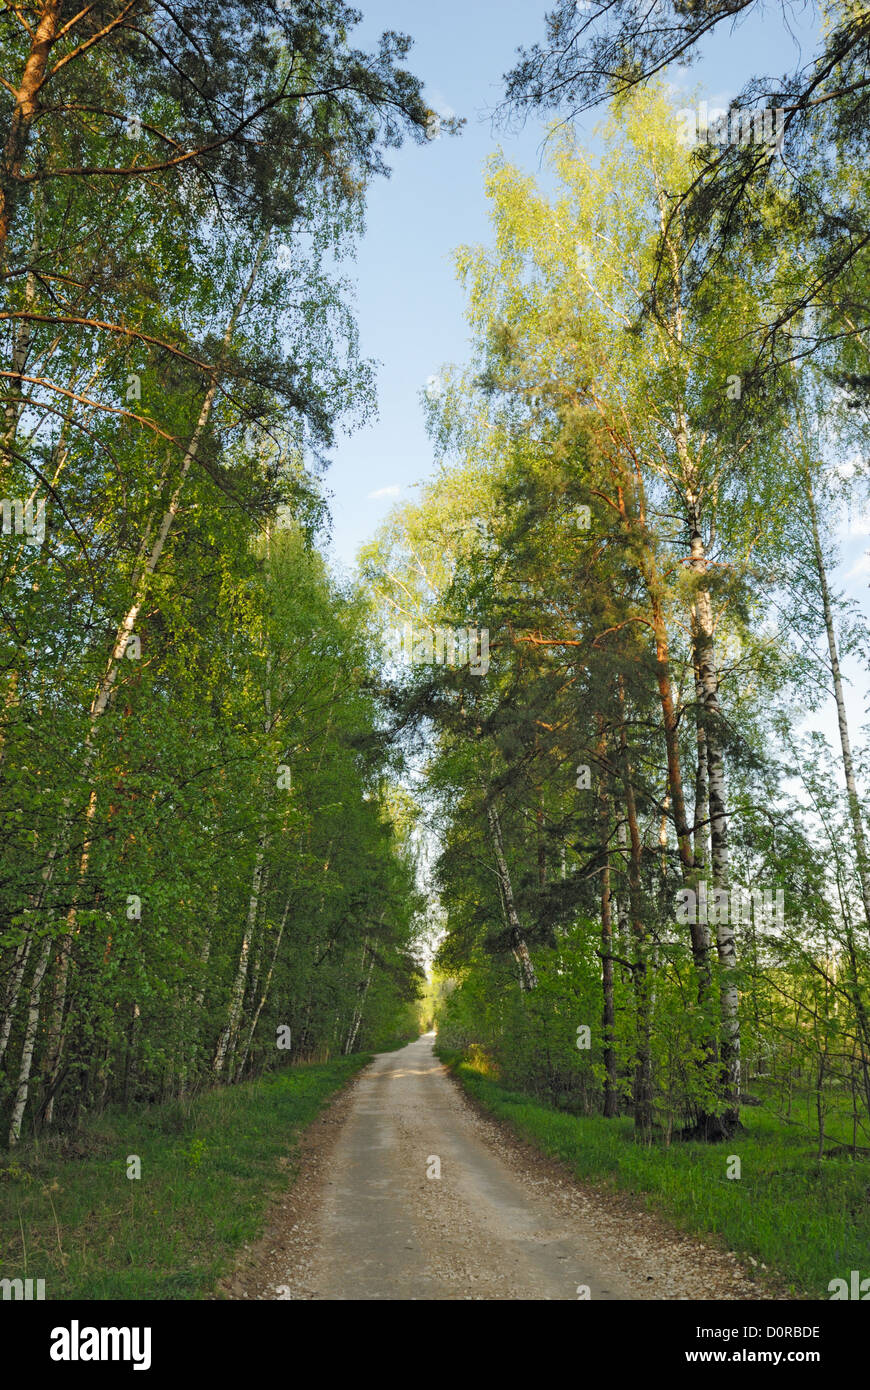 Rural road through the forest Stock Photo